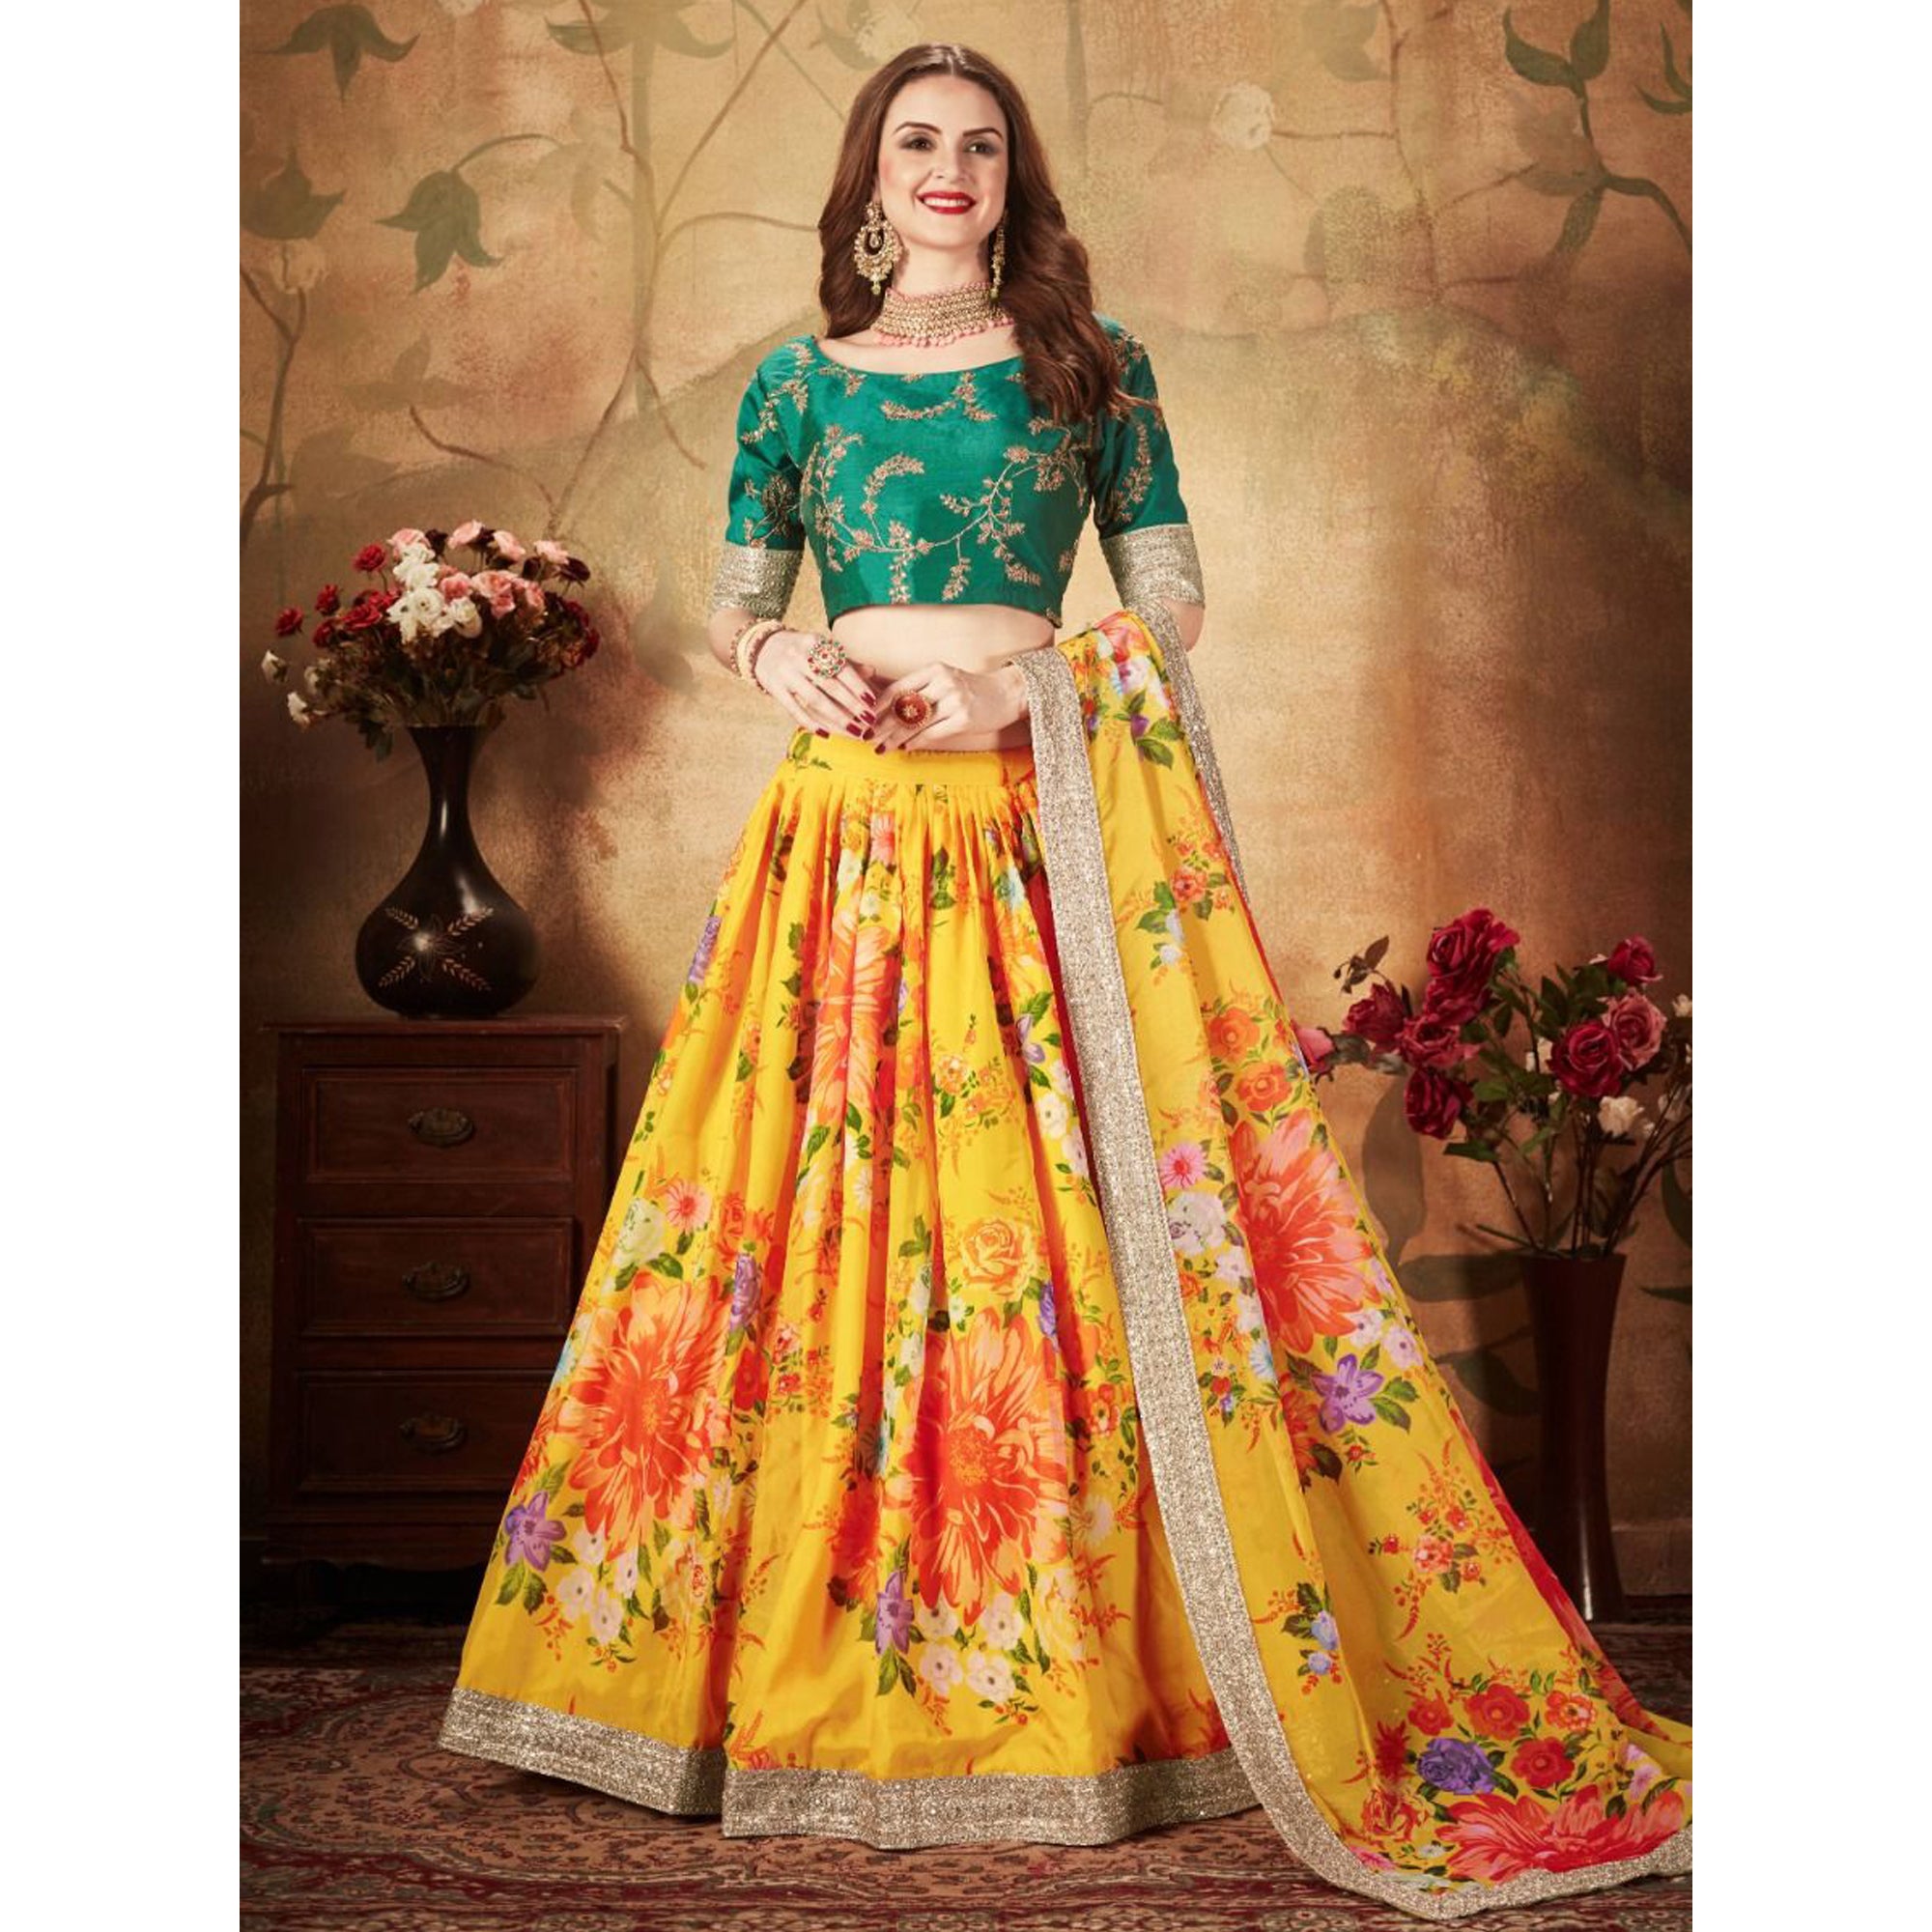 Awesome Yellow Color Designer Embroidery Work Floral Printed Lehenga Choli